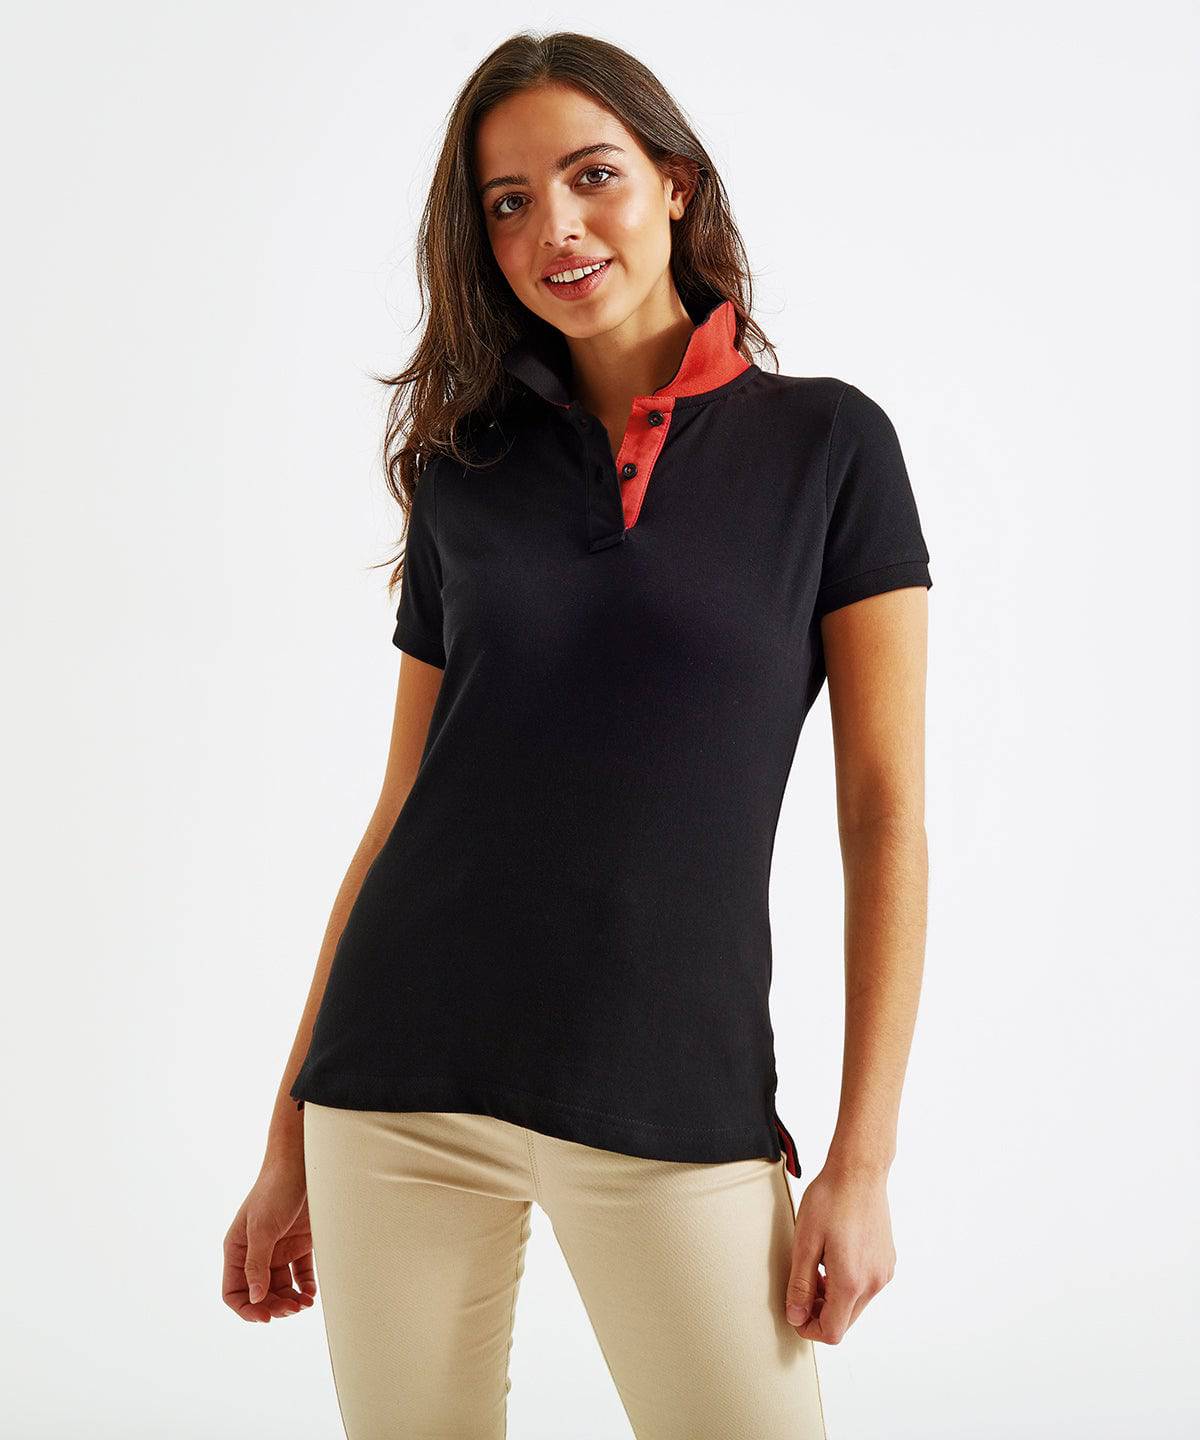 Navy/Red - Women's contrast polo